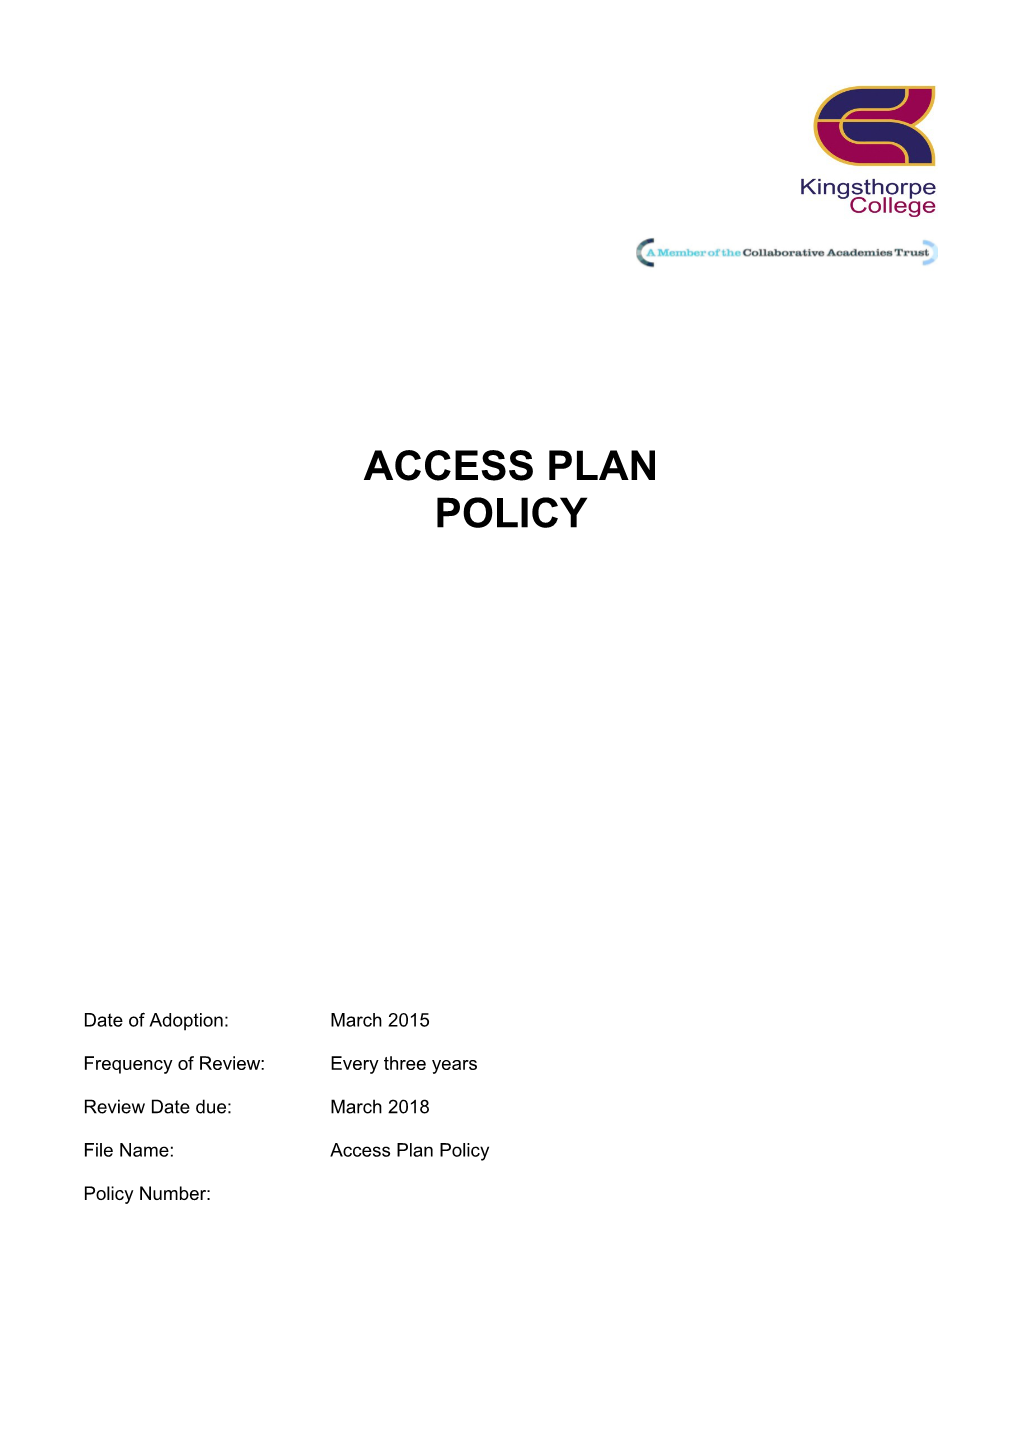 Kingsthorpecollege -Access Plan Policy